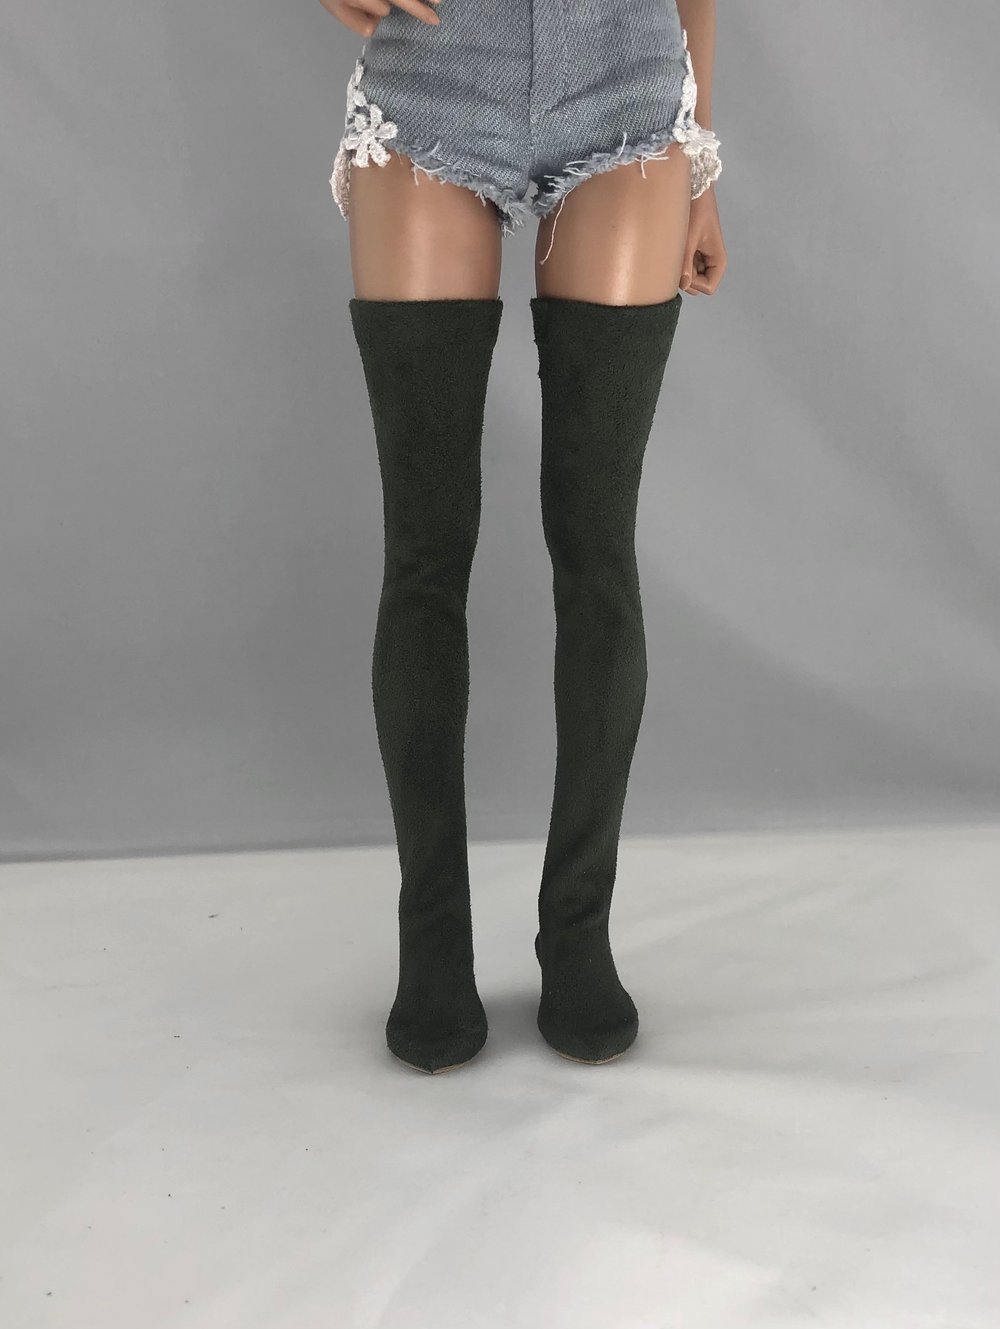 Olive Suede Thigh High Boots: Minifee 